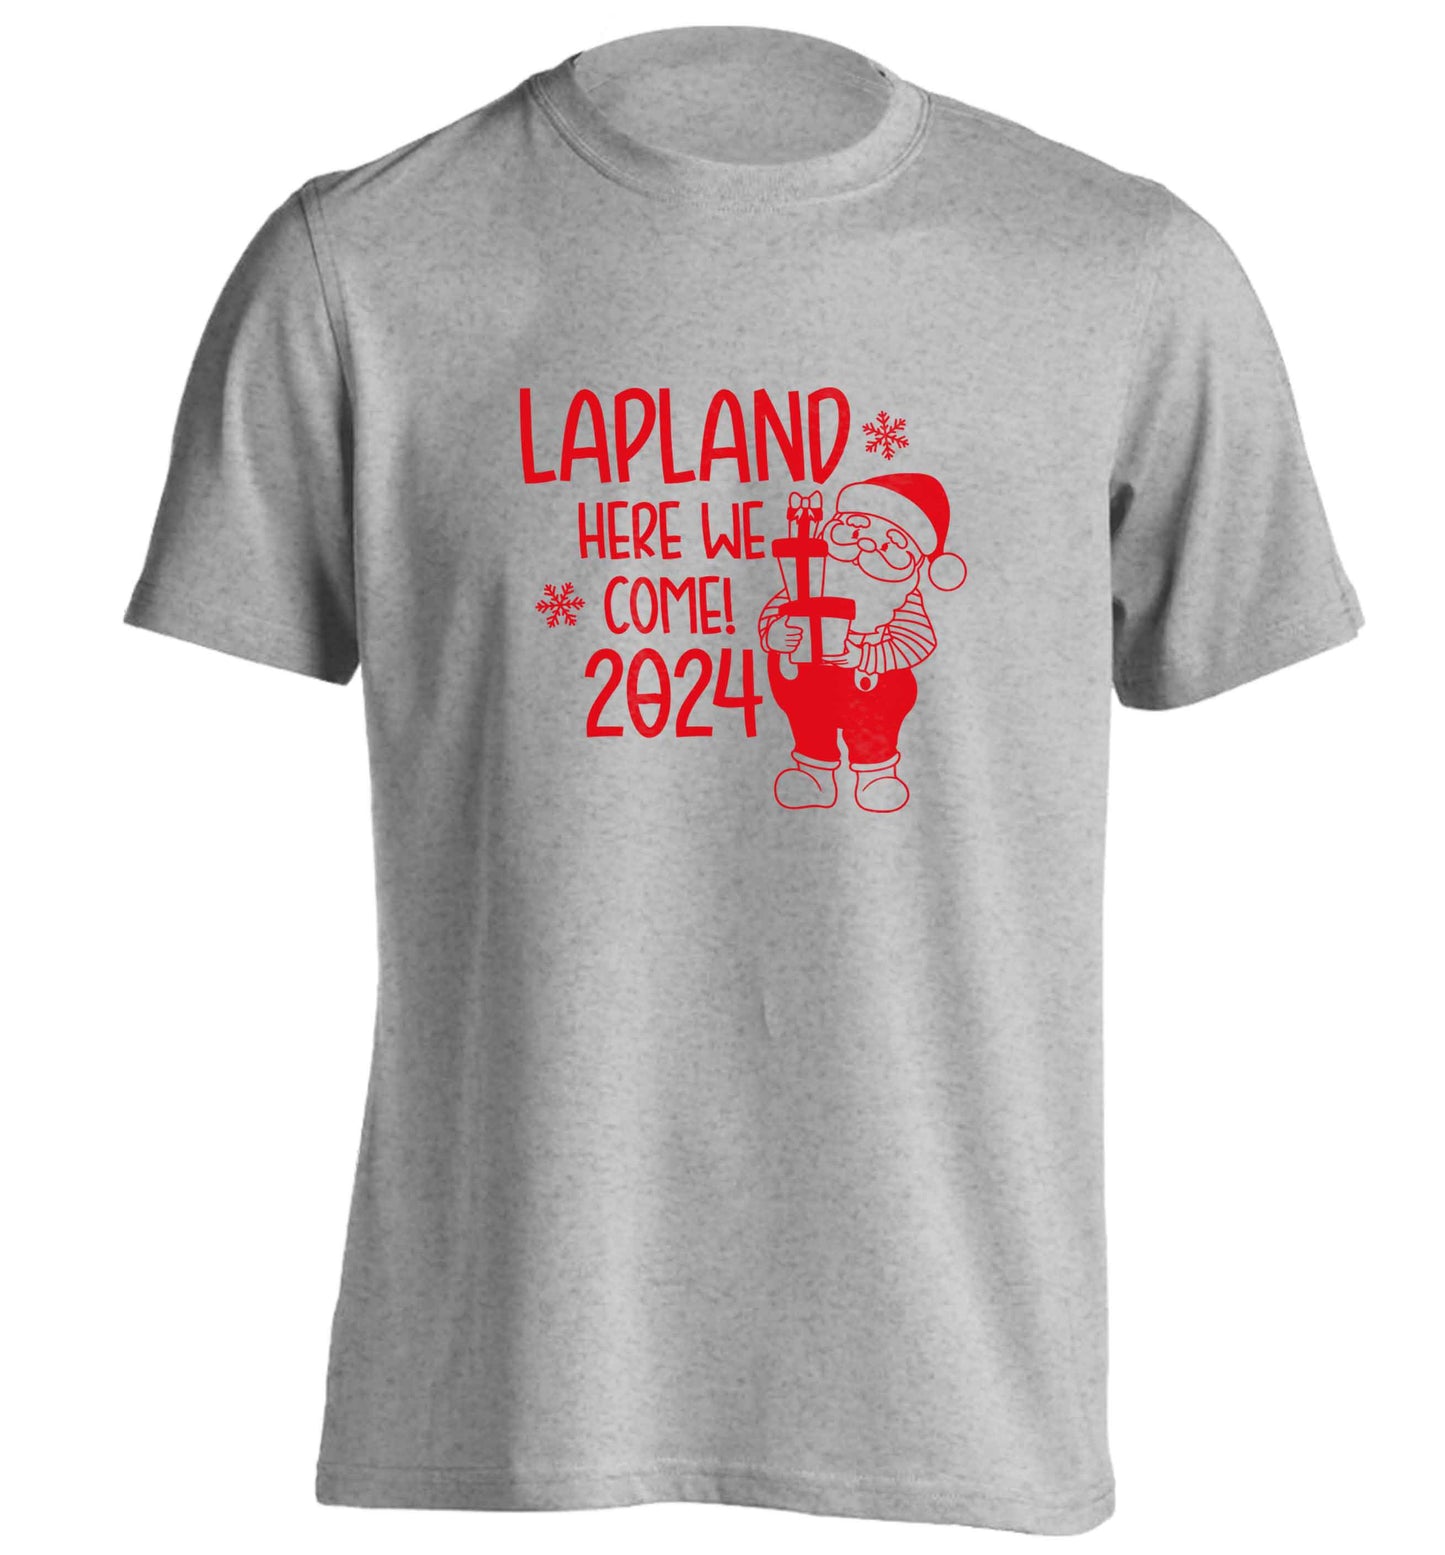 Lapland here we come adults unisex grey Tshirt 2XL